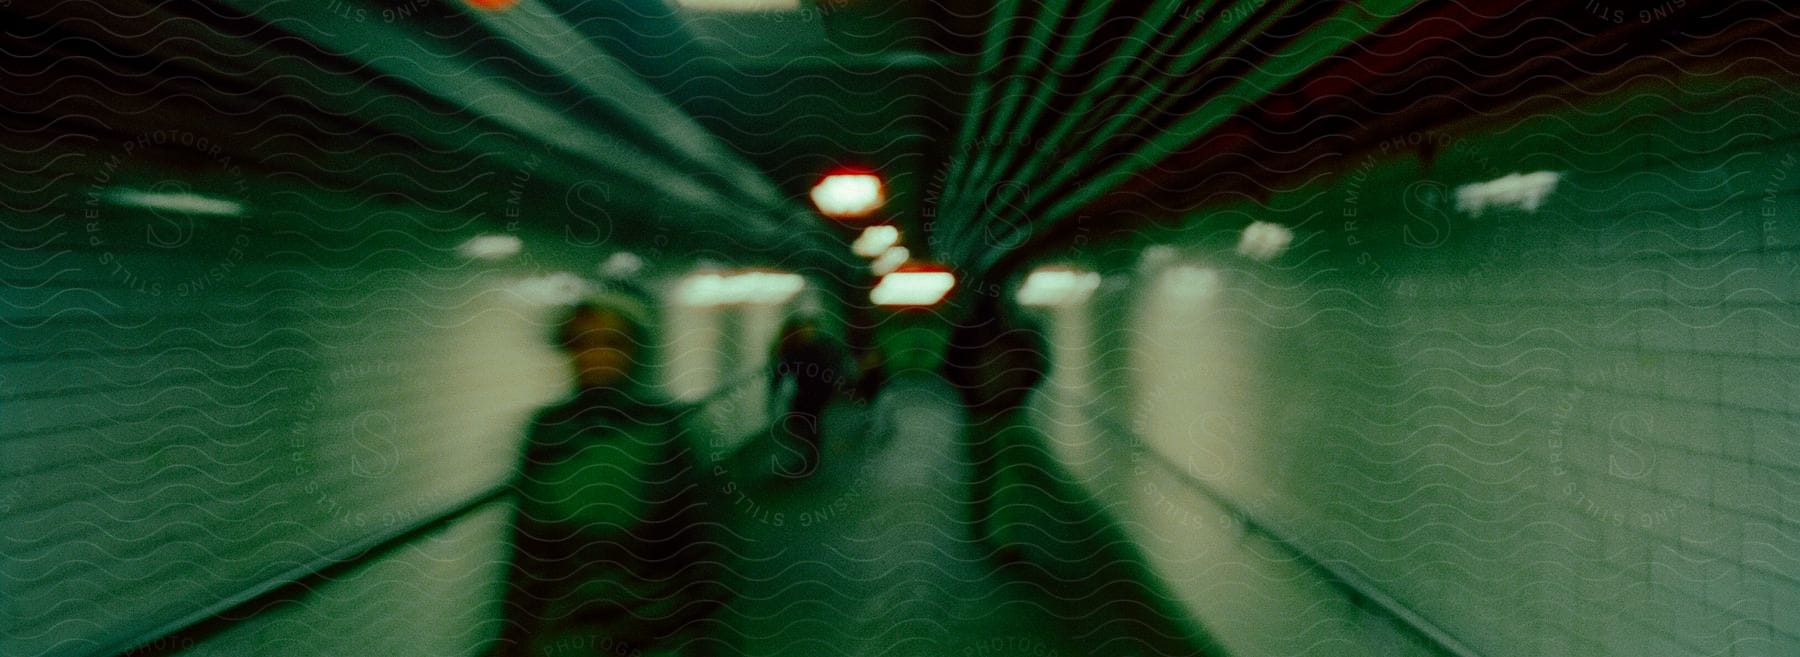 A small group of people walking through a tunnel with a blurry effect